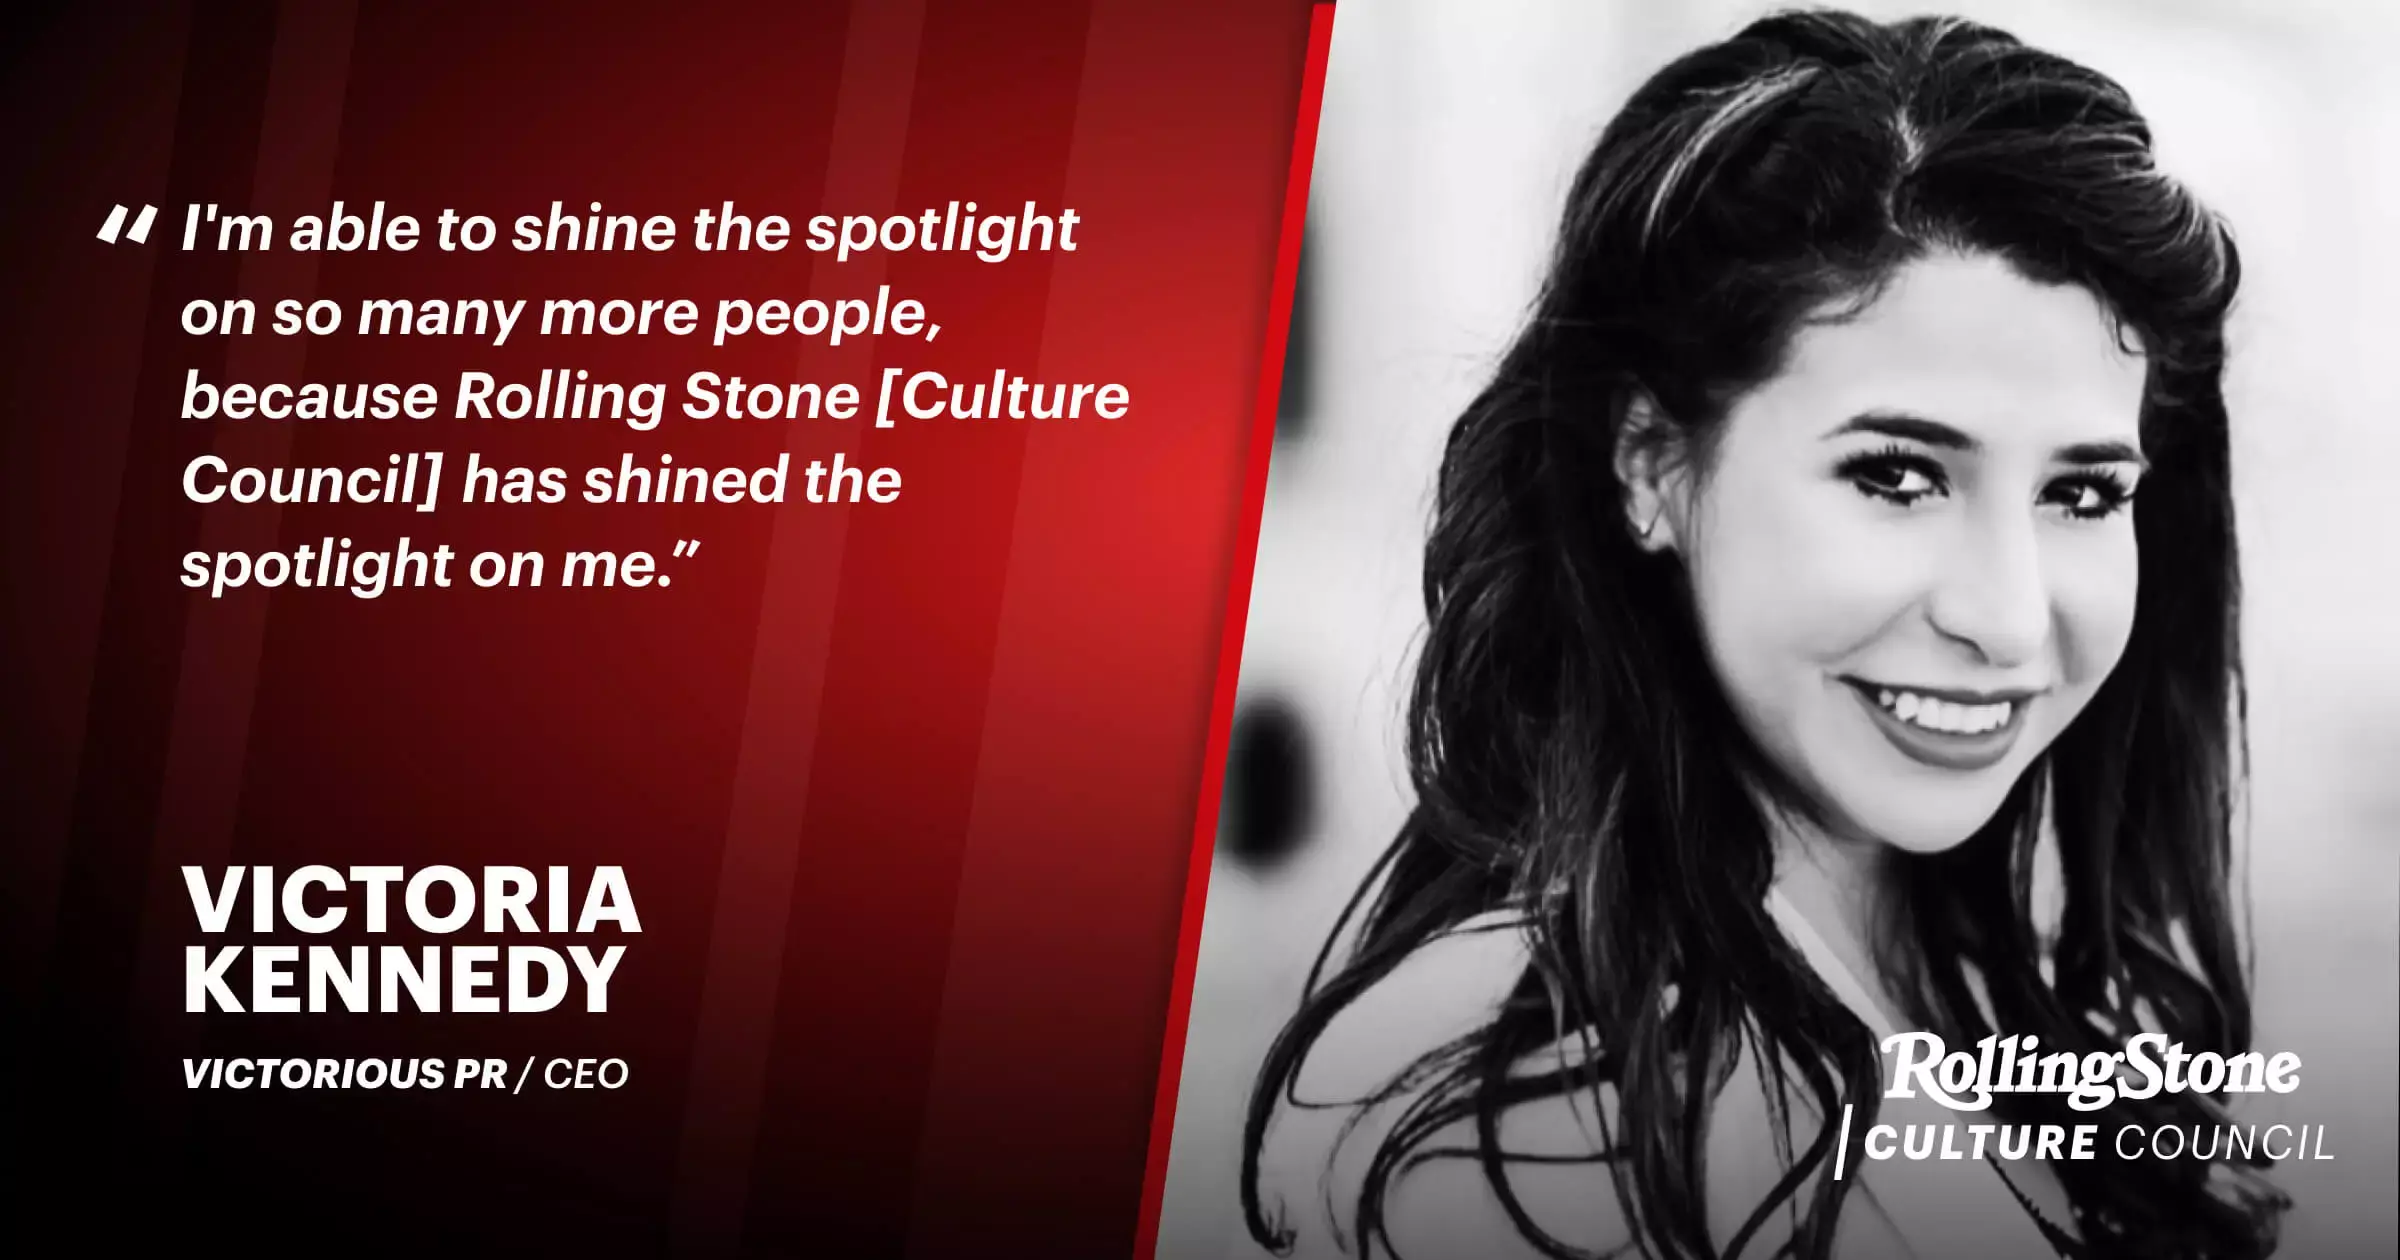 Rolling Stone Culture Council Shines a Spotlight on Victoria Kennedy’s Expertise